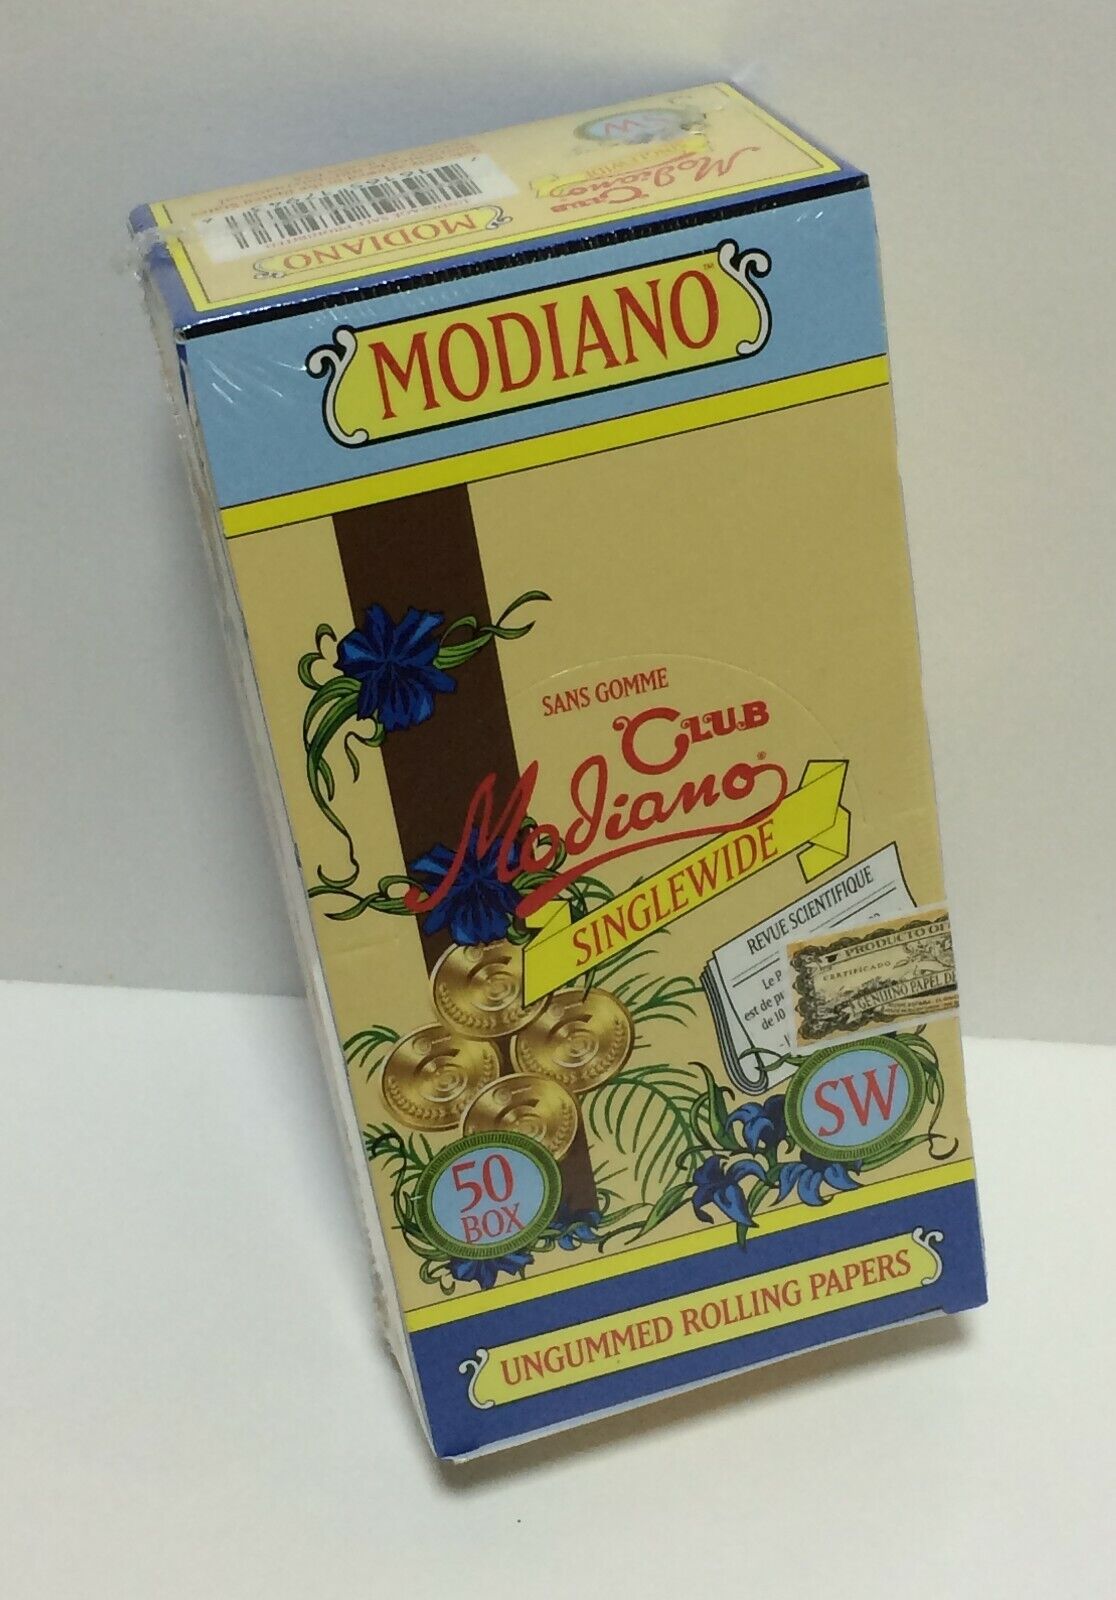 SEALED BOX CLUB MODIANO ROLLING PAPERS SINGLE WIDE UNGUMMED 50 PKS/ 50 LEAVES EA